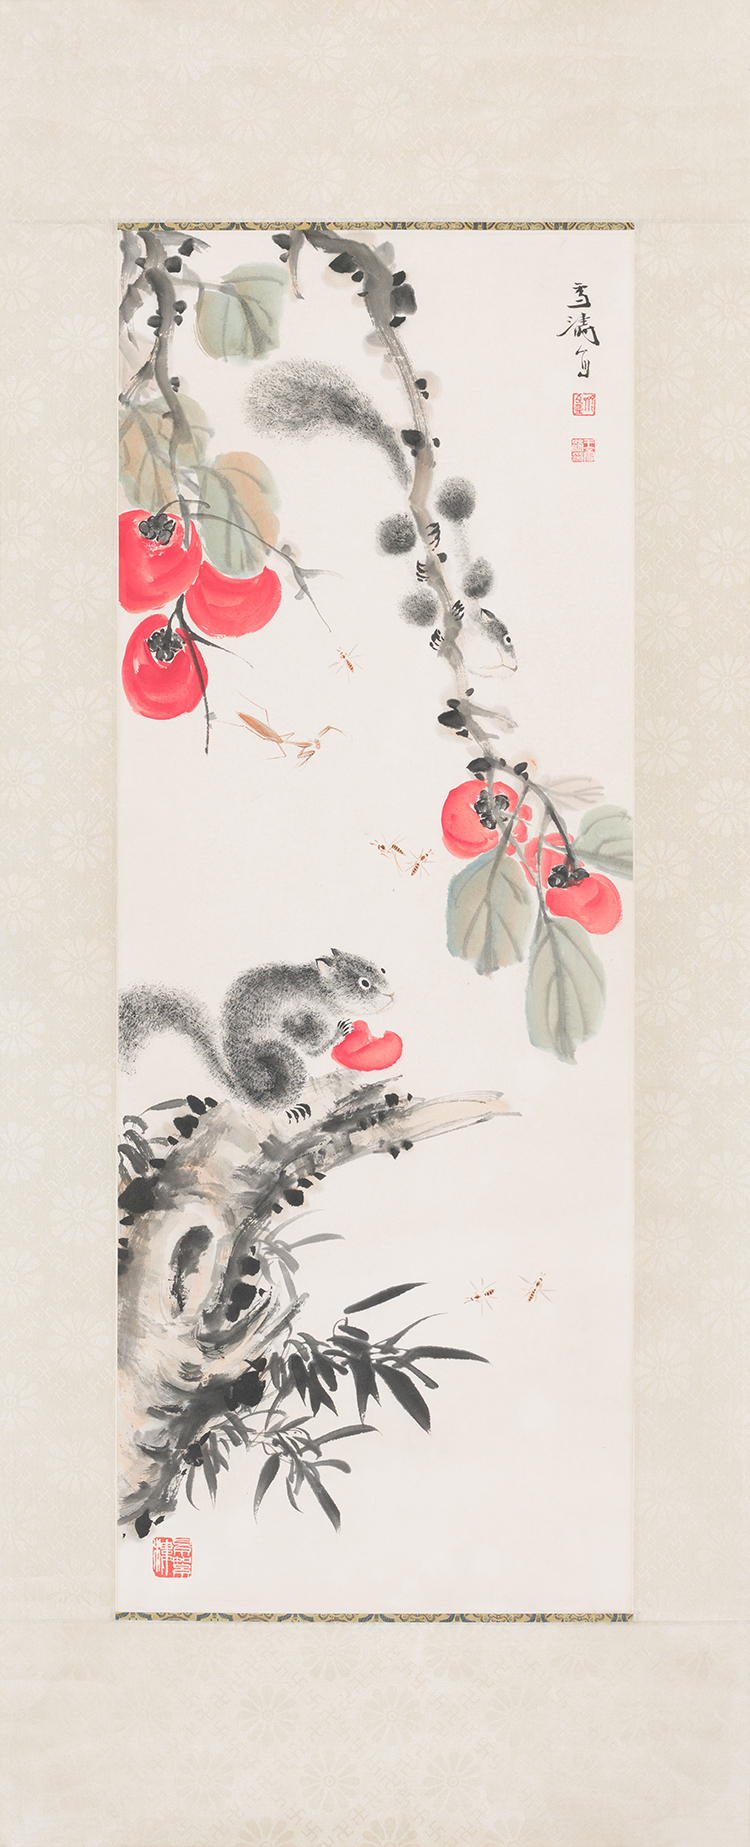 Squirrels and Persimmons by Attributed to Wang Xuetao